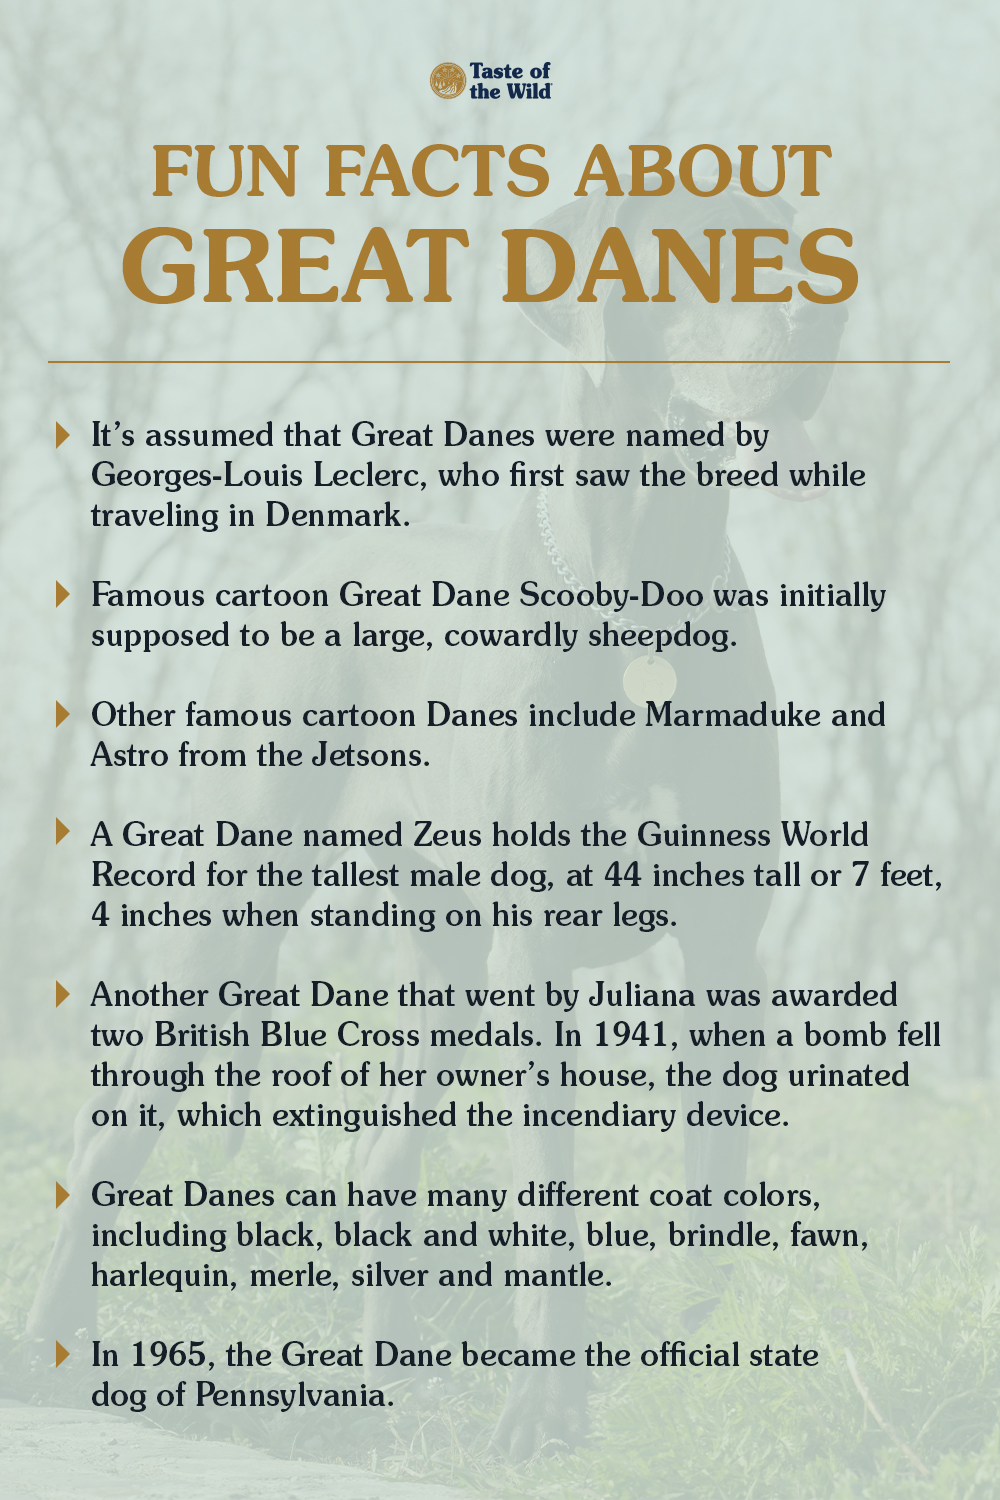 Infographic: Facts About Great Danes | Taste of the Wild